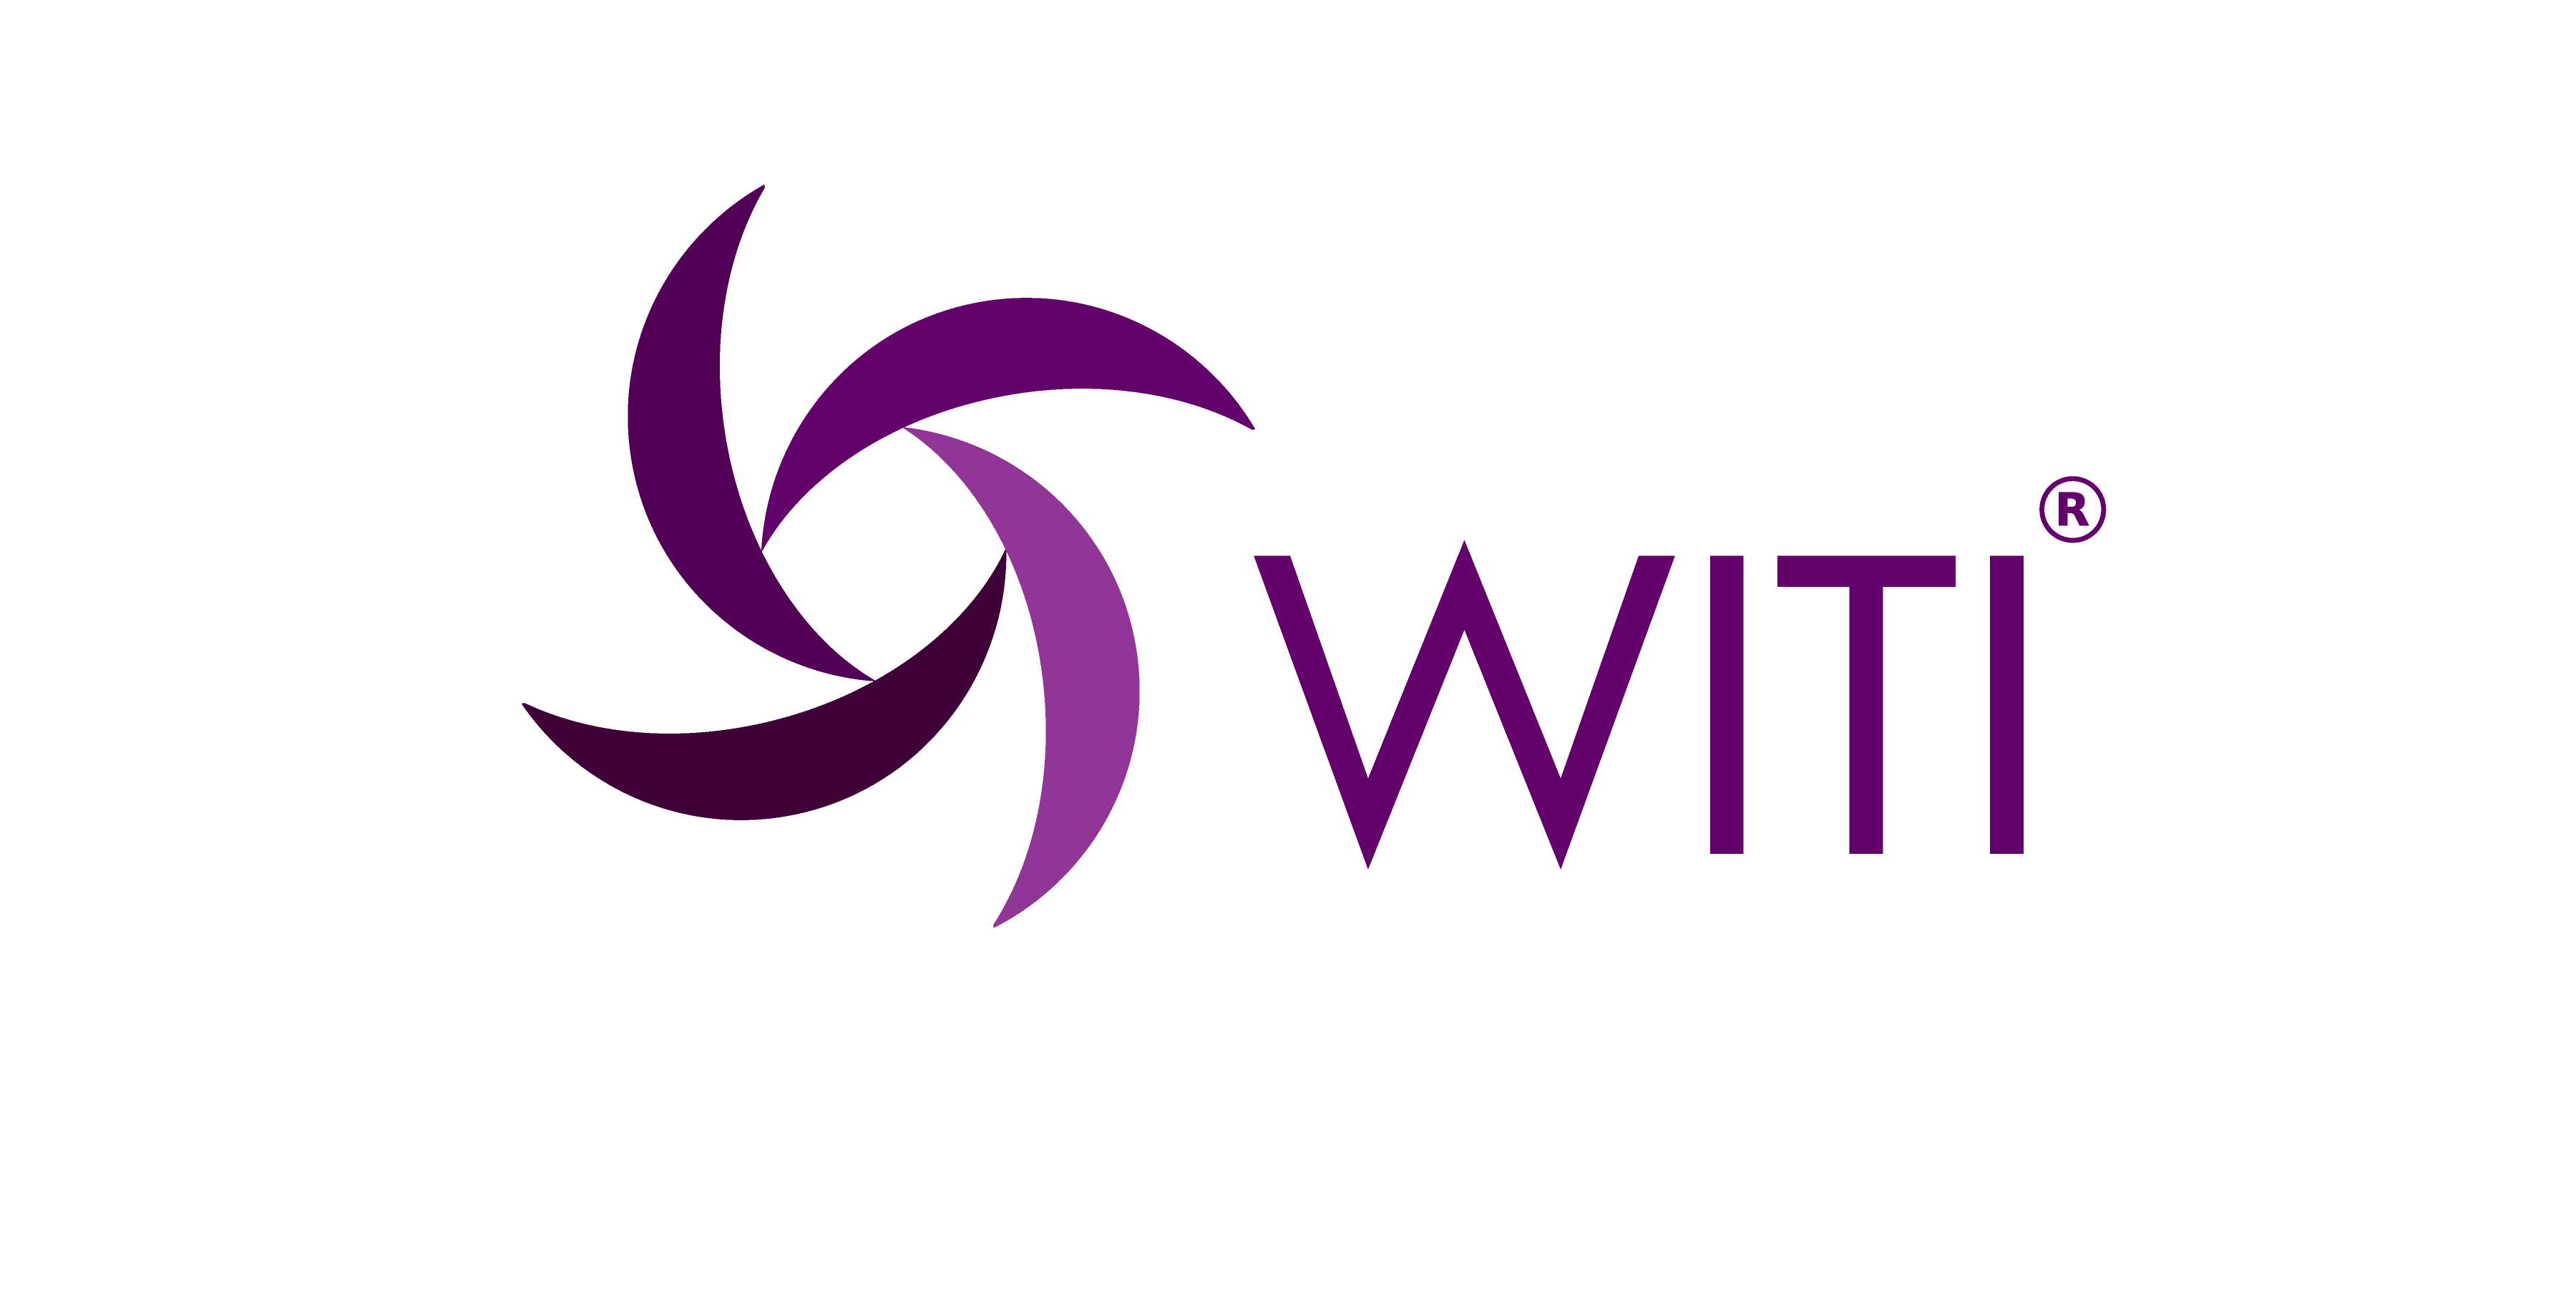 Featured Image for WITI - Women in Technology International